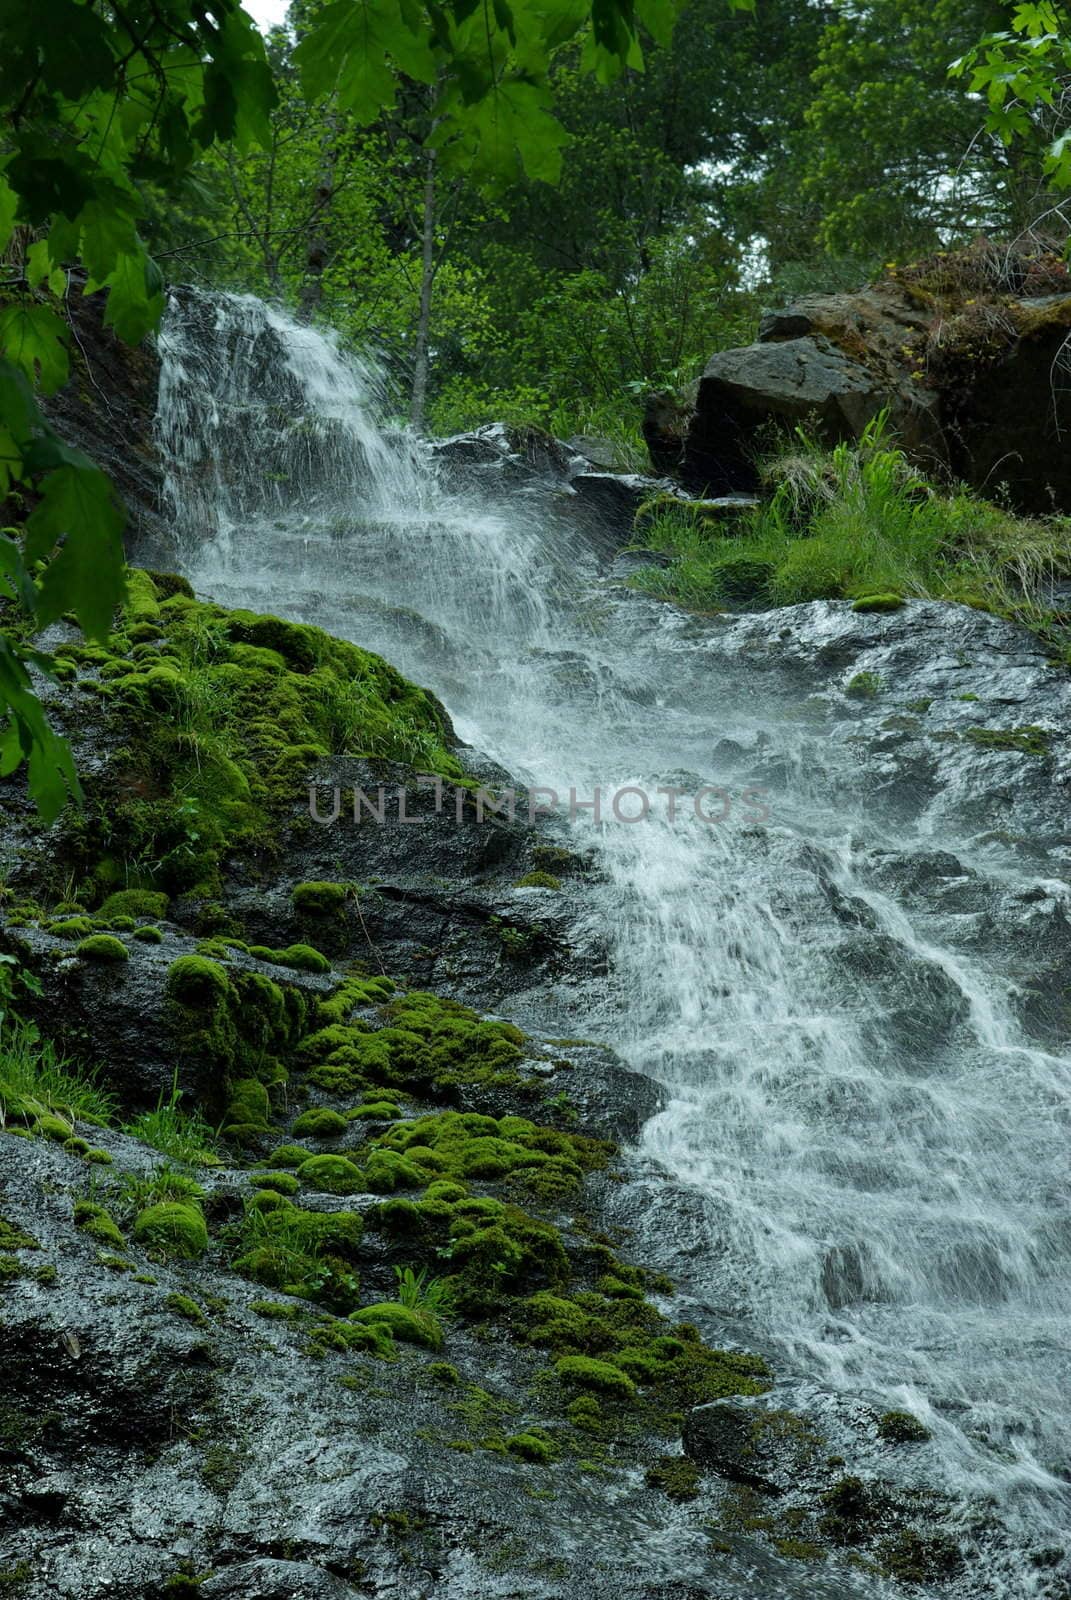 A small waterfall flowing down moss covered rocks.